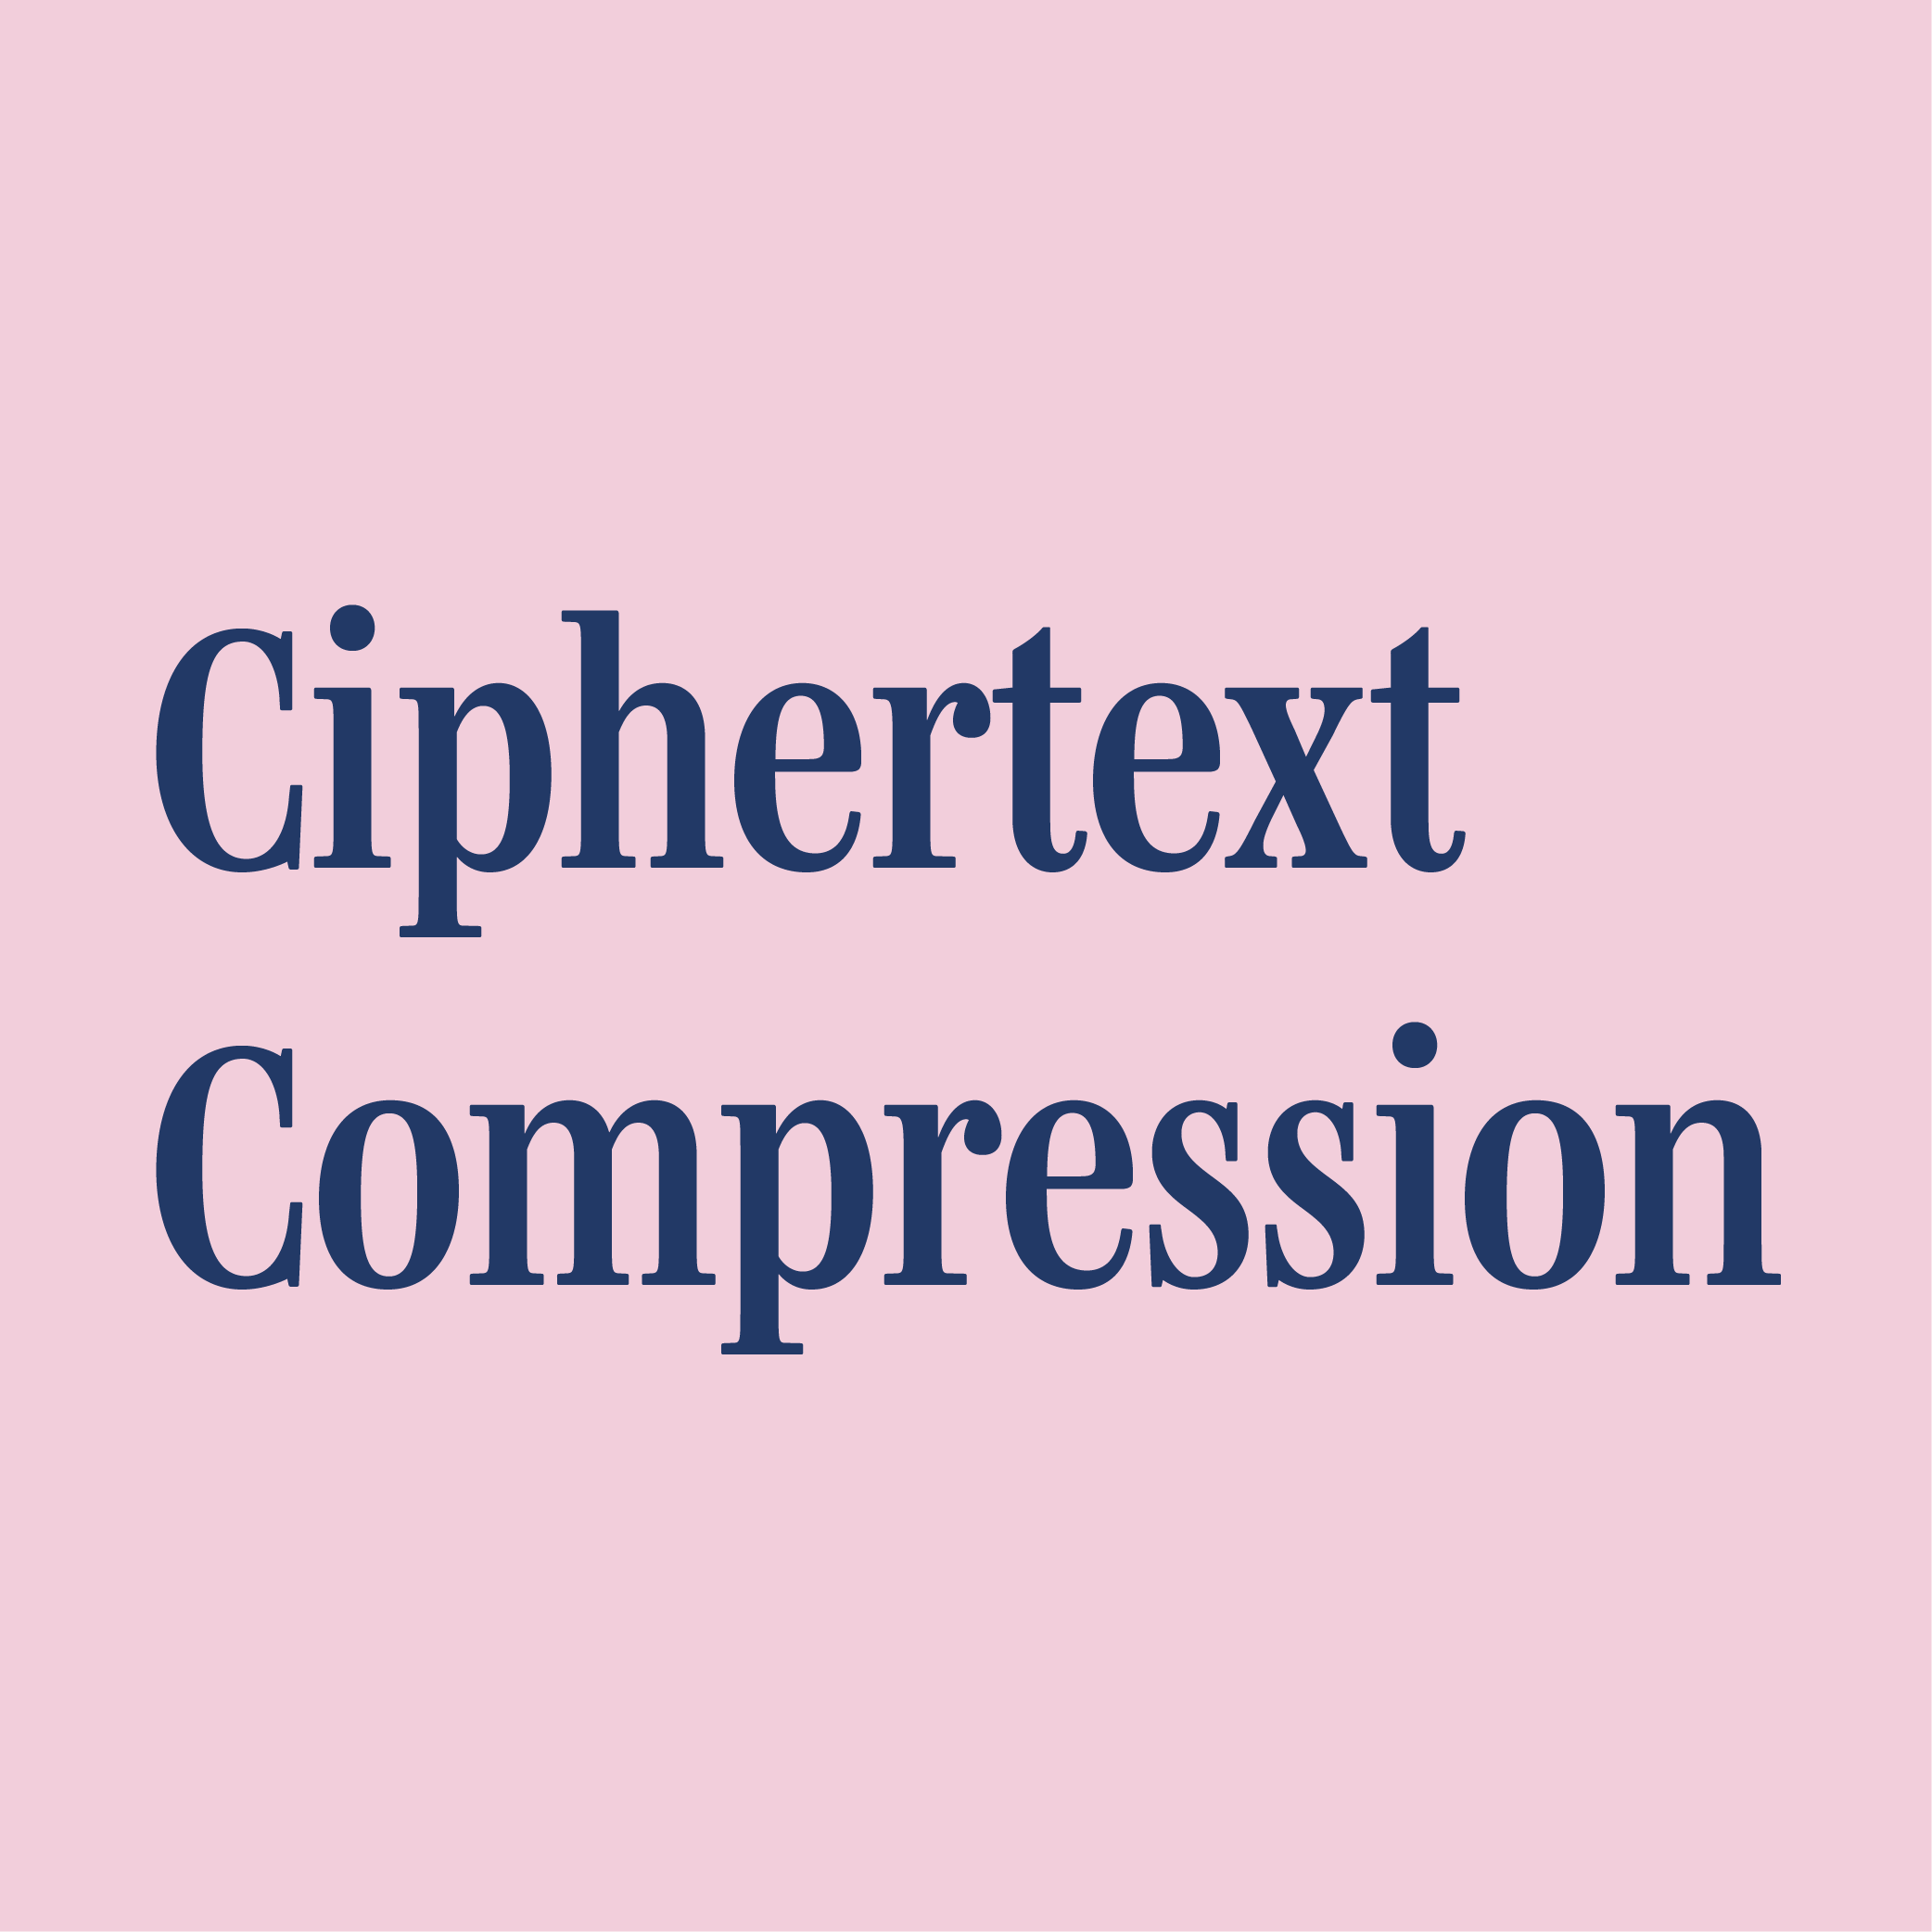 Logo with the text 'Ciphertext Compression'.